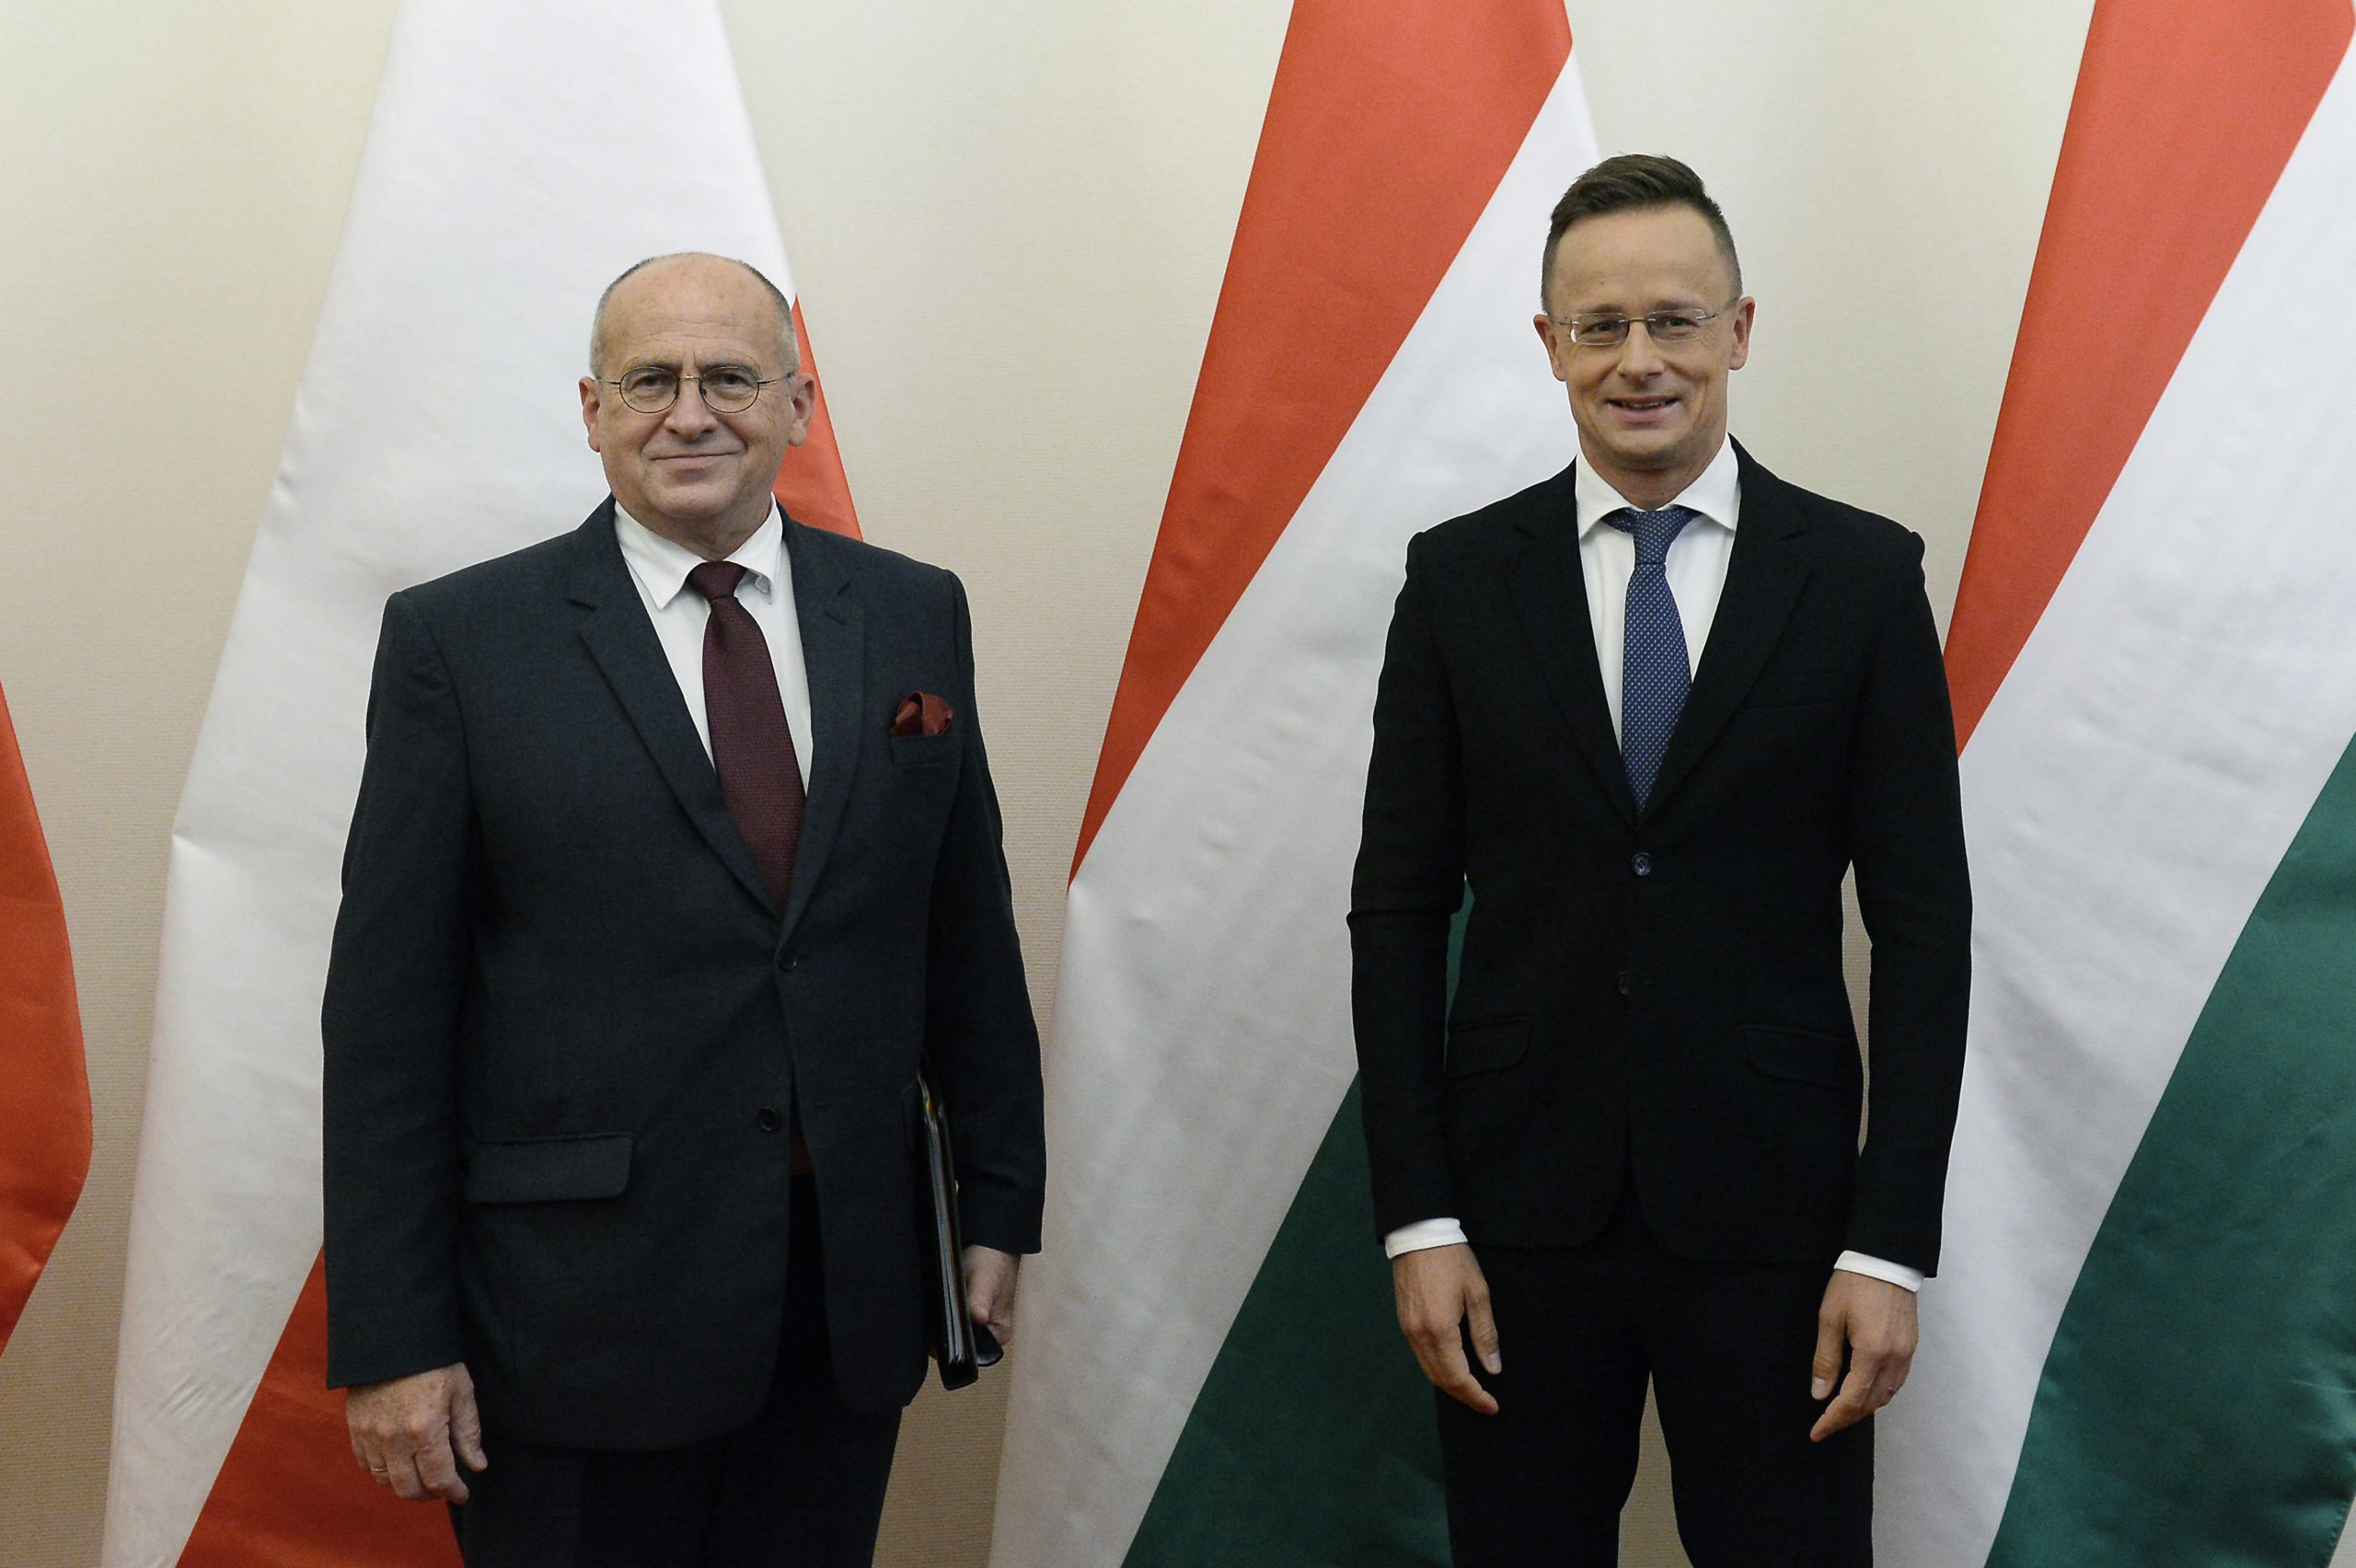 Hungary and Poland to Set Up Joint Institute for Comparative Law against 'Suppression of Opinions by Liberal Ideology'